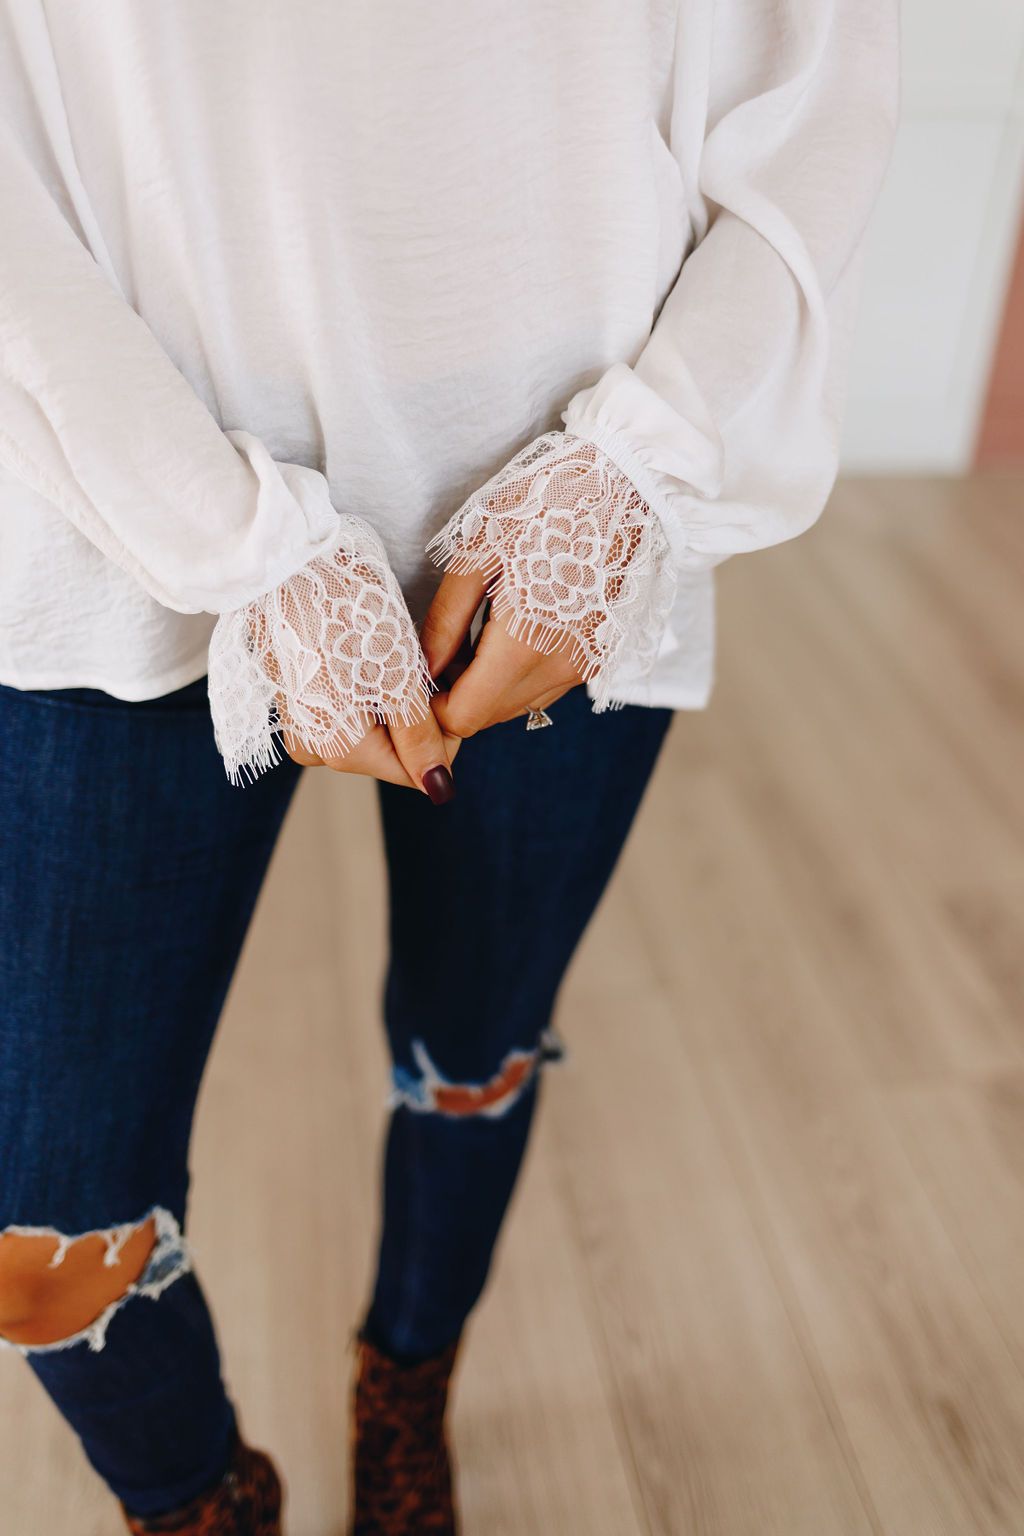 The Morning View Lace Blouse Stay Warm In Style